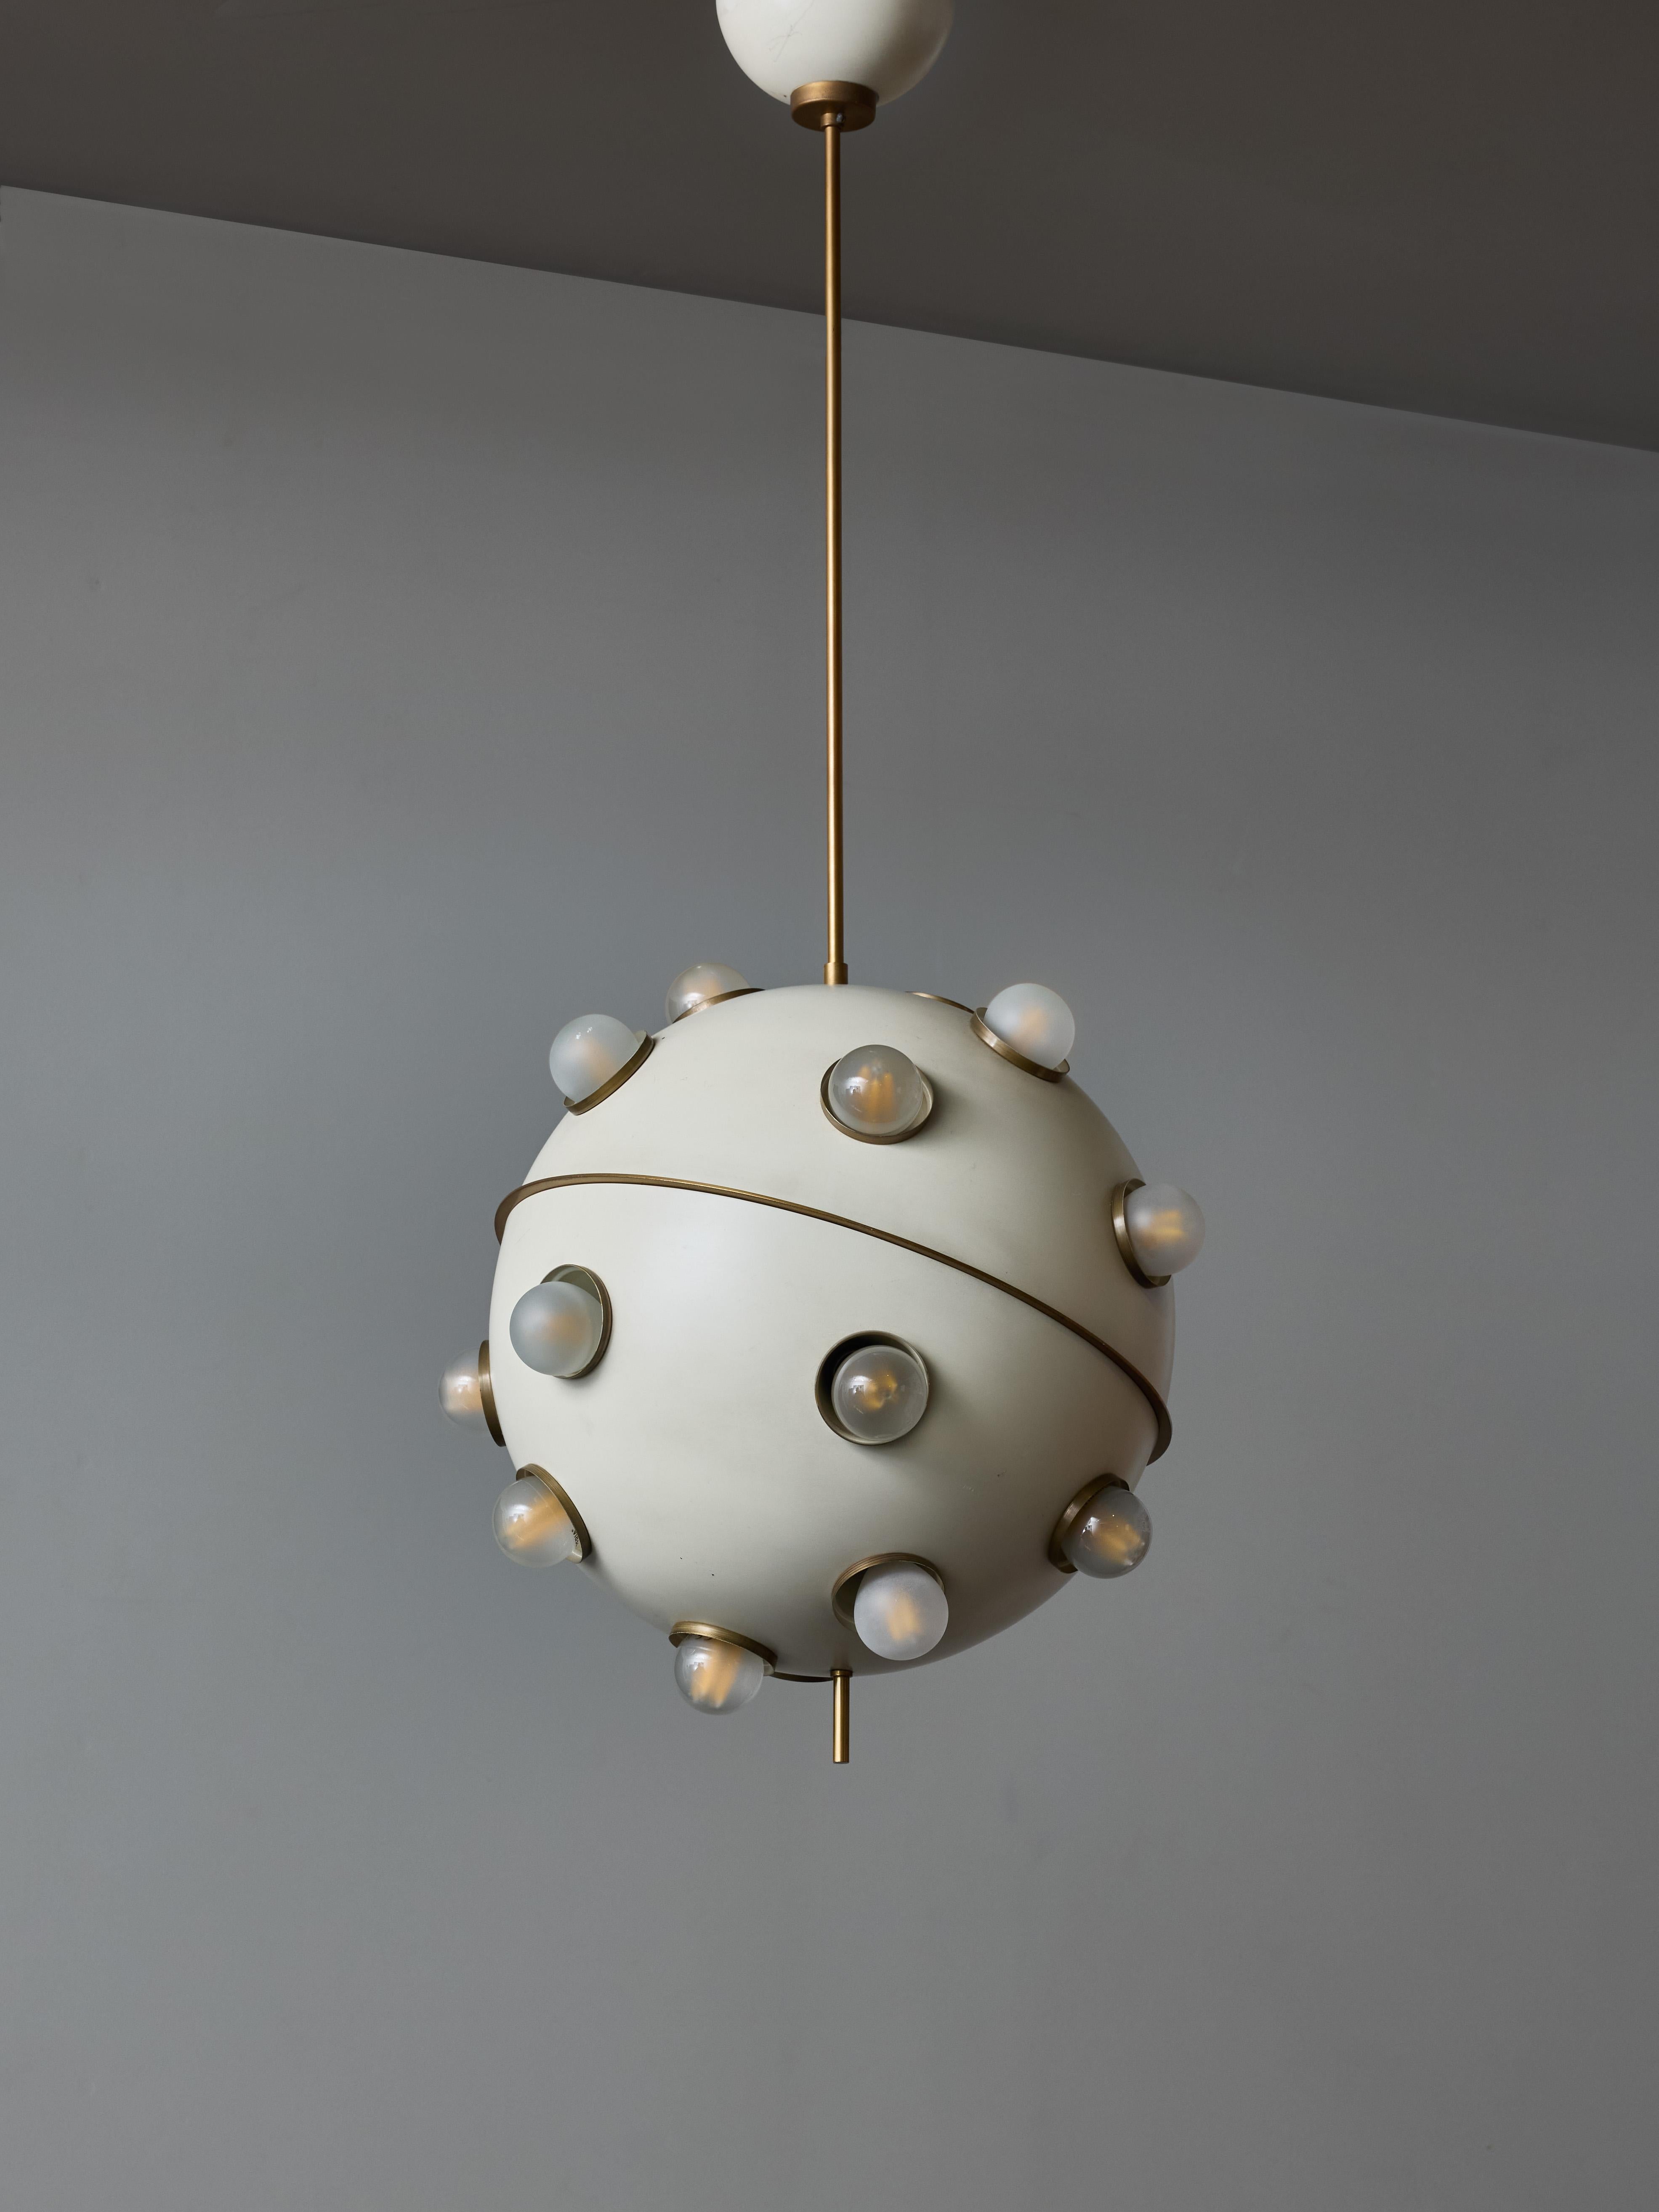 Chandelier model 551 designed by Oscar Torlasco for Lumi in the 1960s.

This round chandelier is made of two half spheres with a central brass lip in between. The chandelier is equiped with twenty sources of light giving an overall great lighting